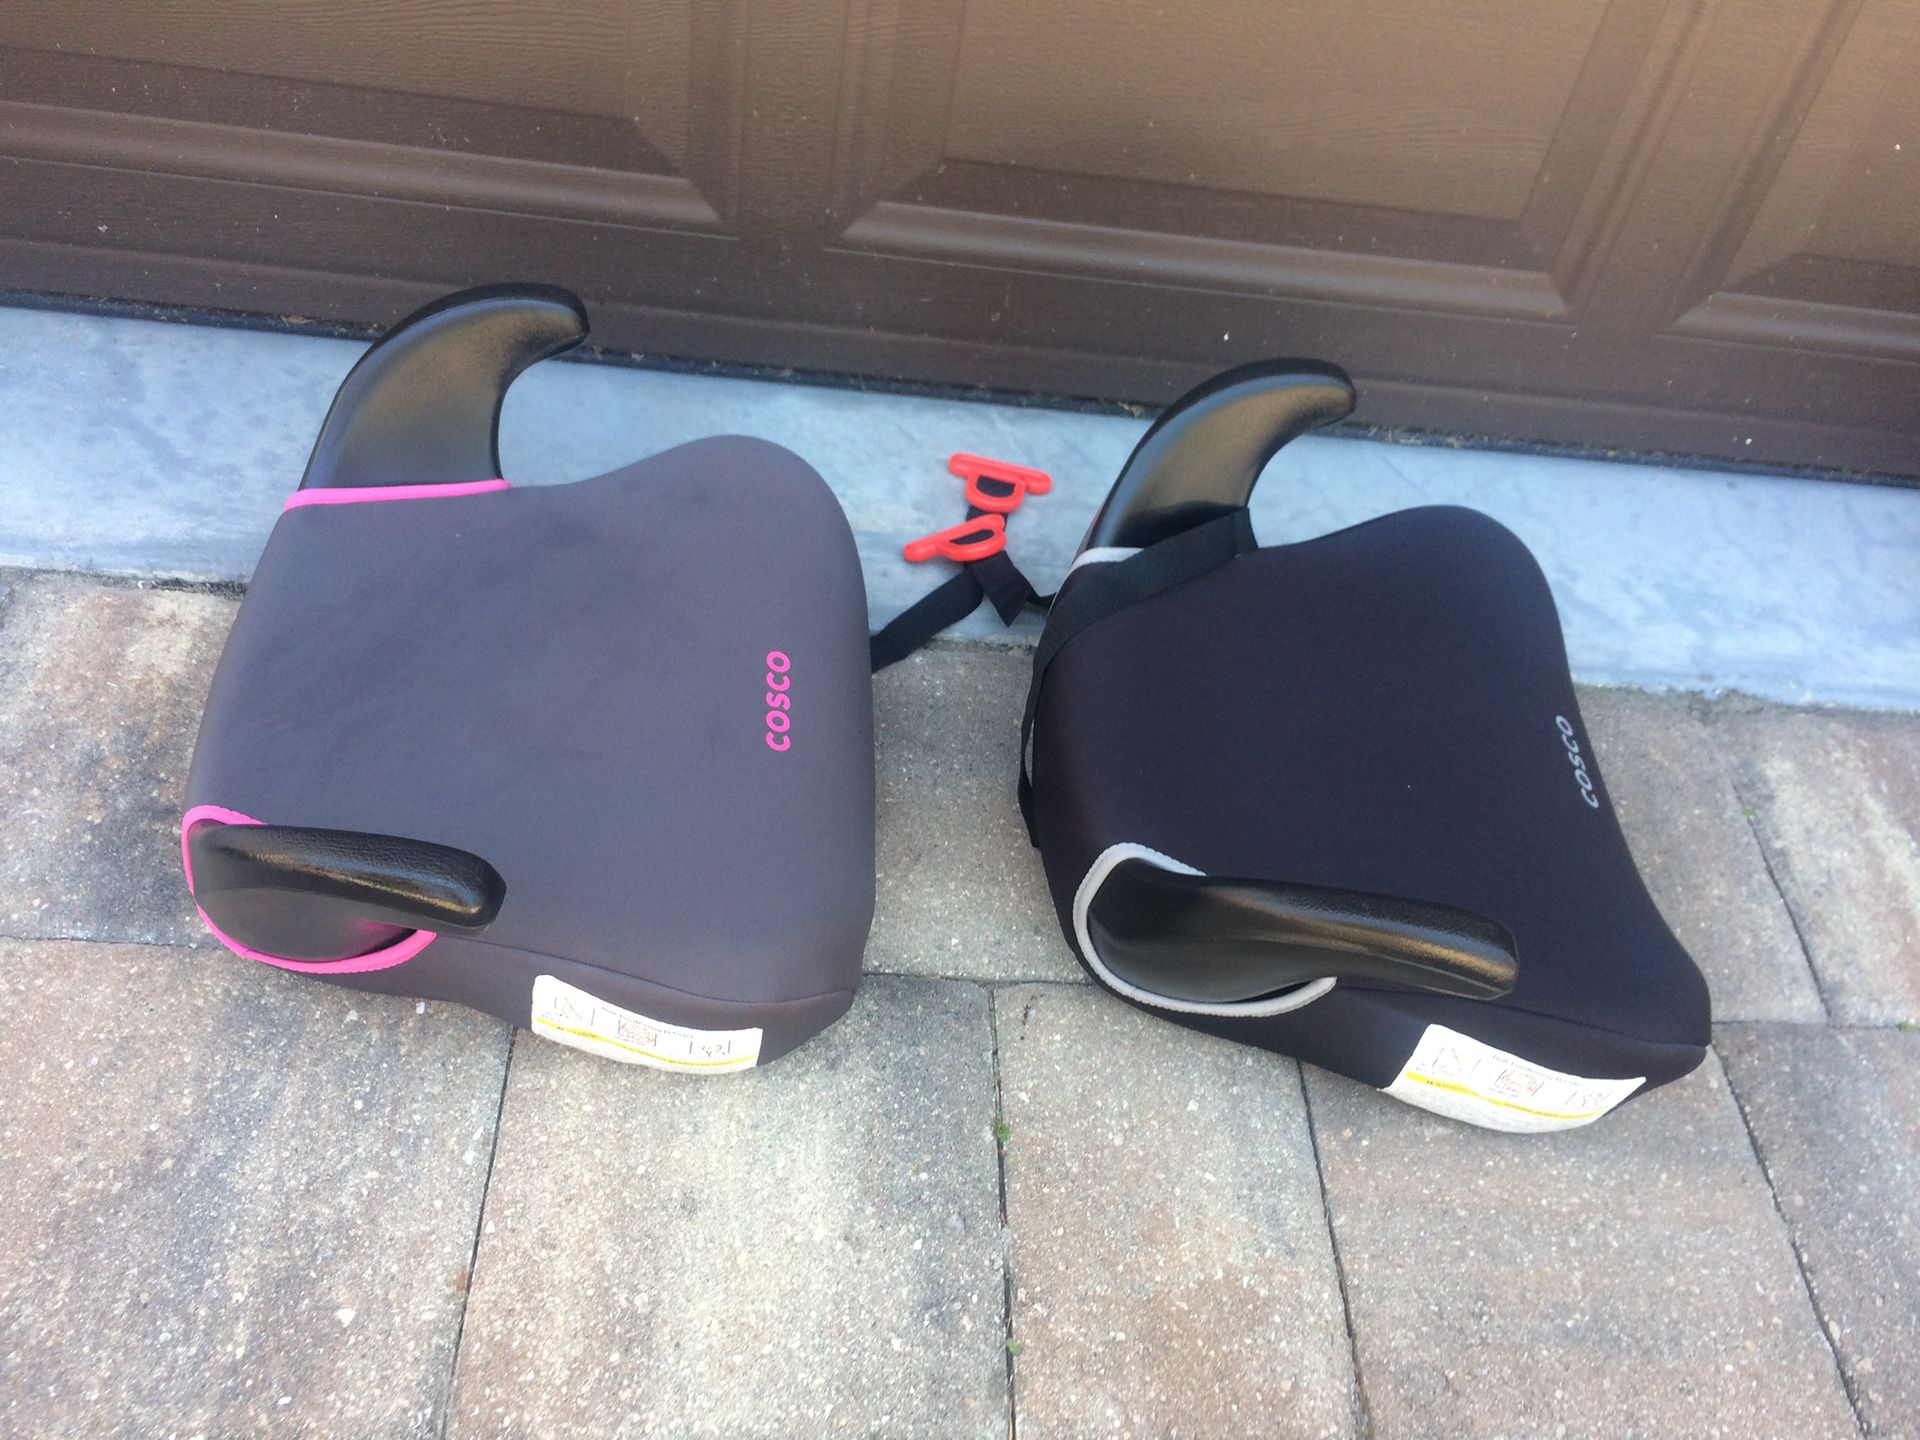 Booster car seats-Excellent condition